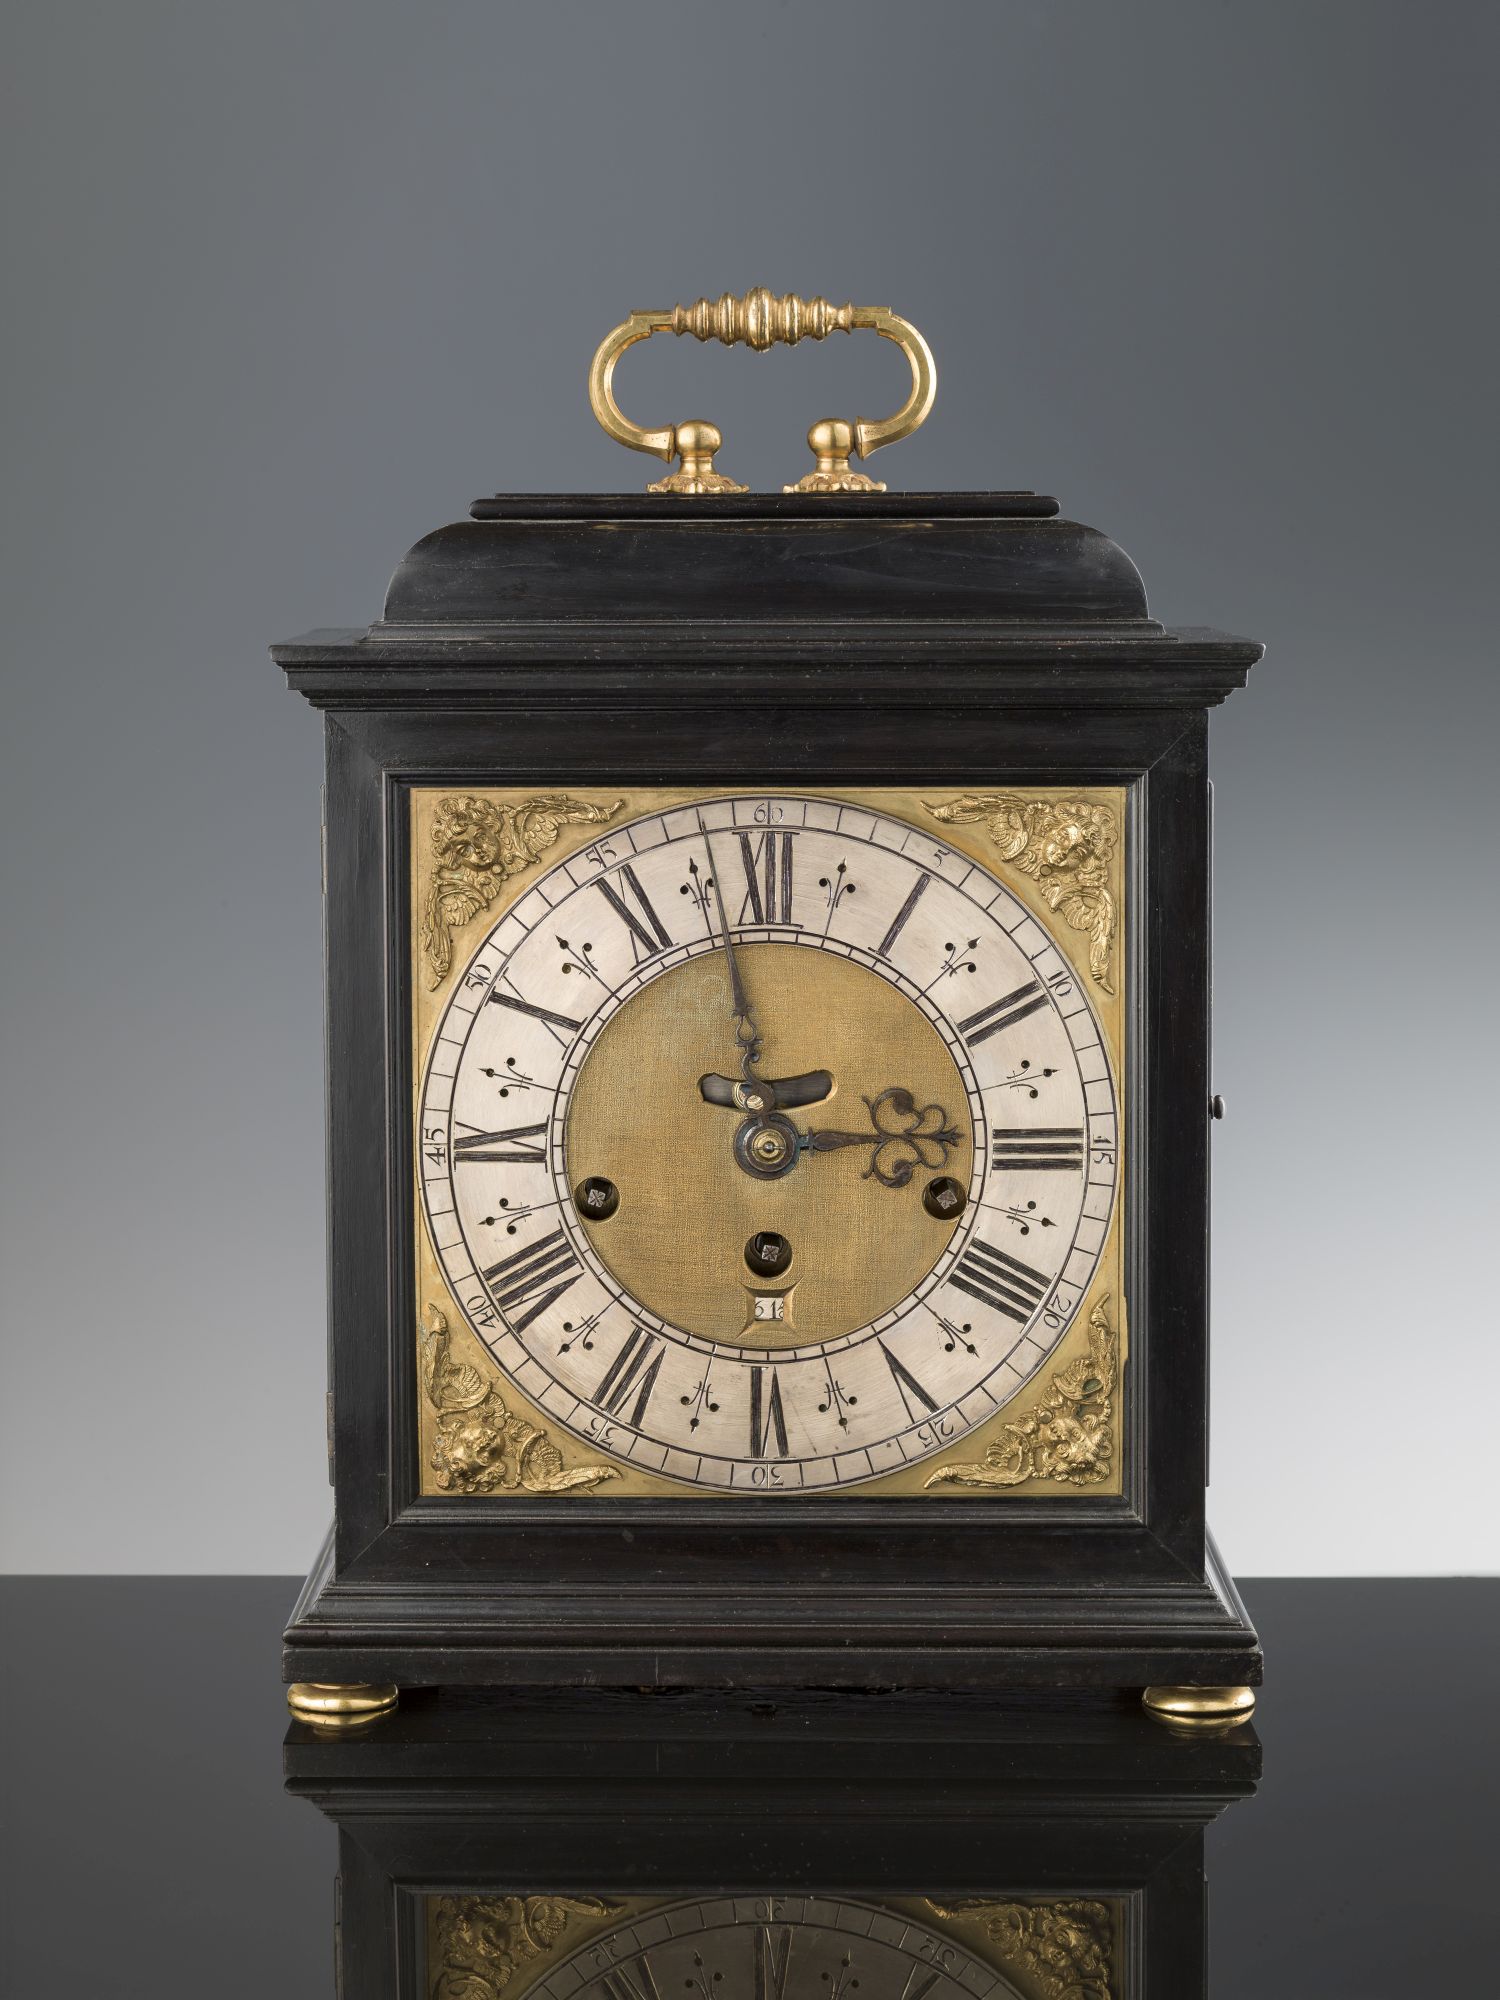 Real time and reality time: the clocks of the Pitti Palace from the 17th to the 19th century